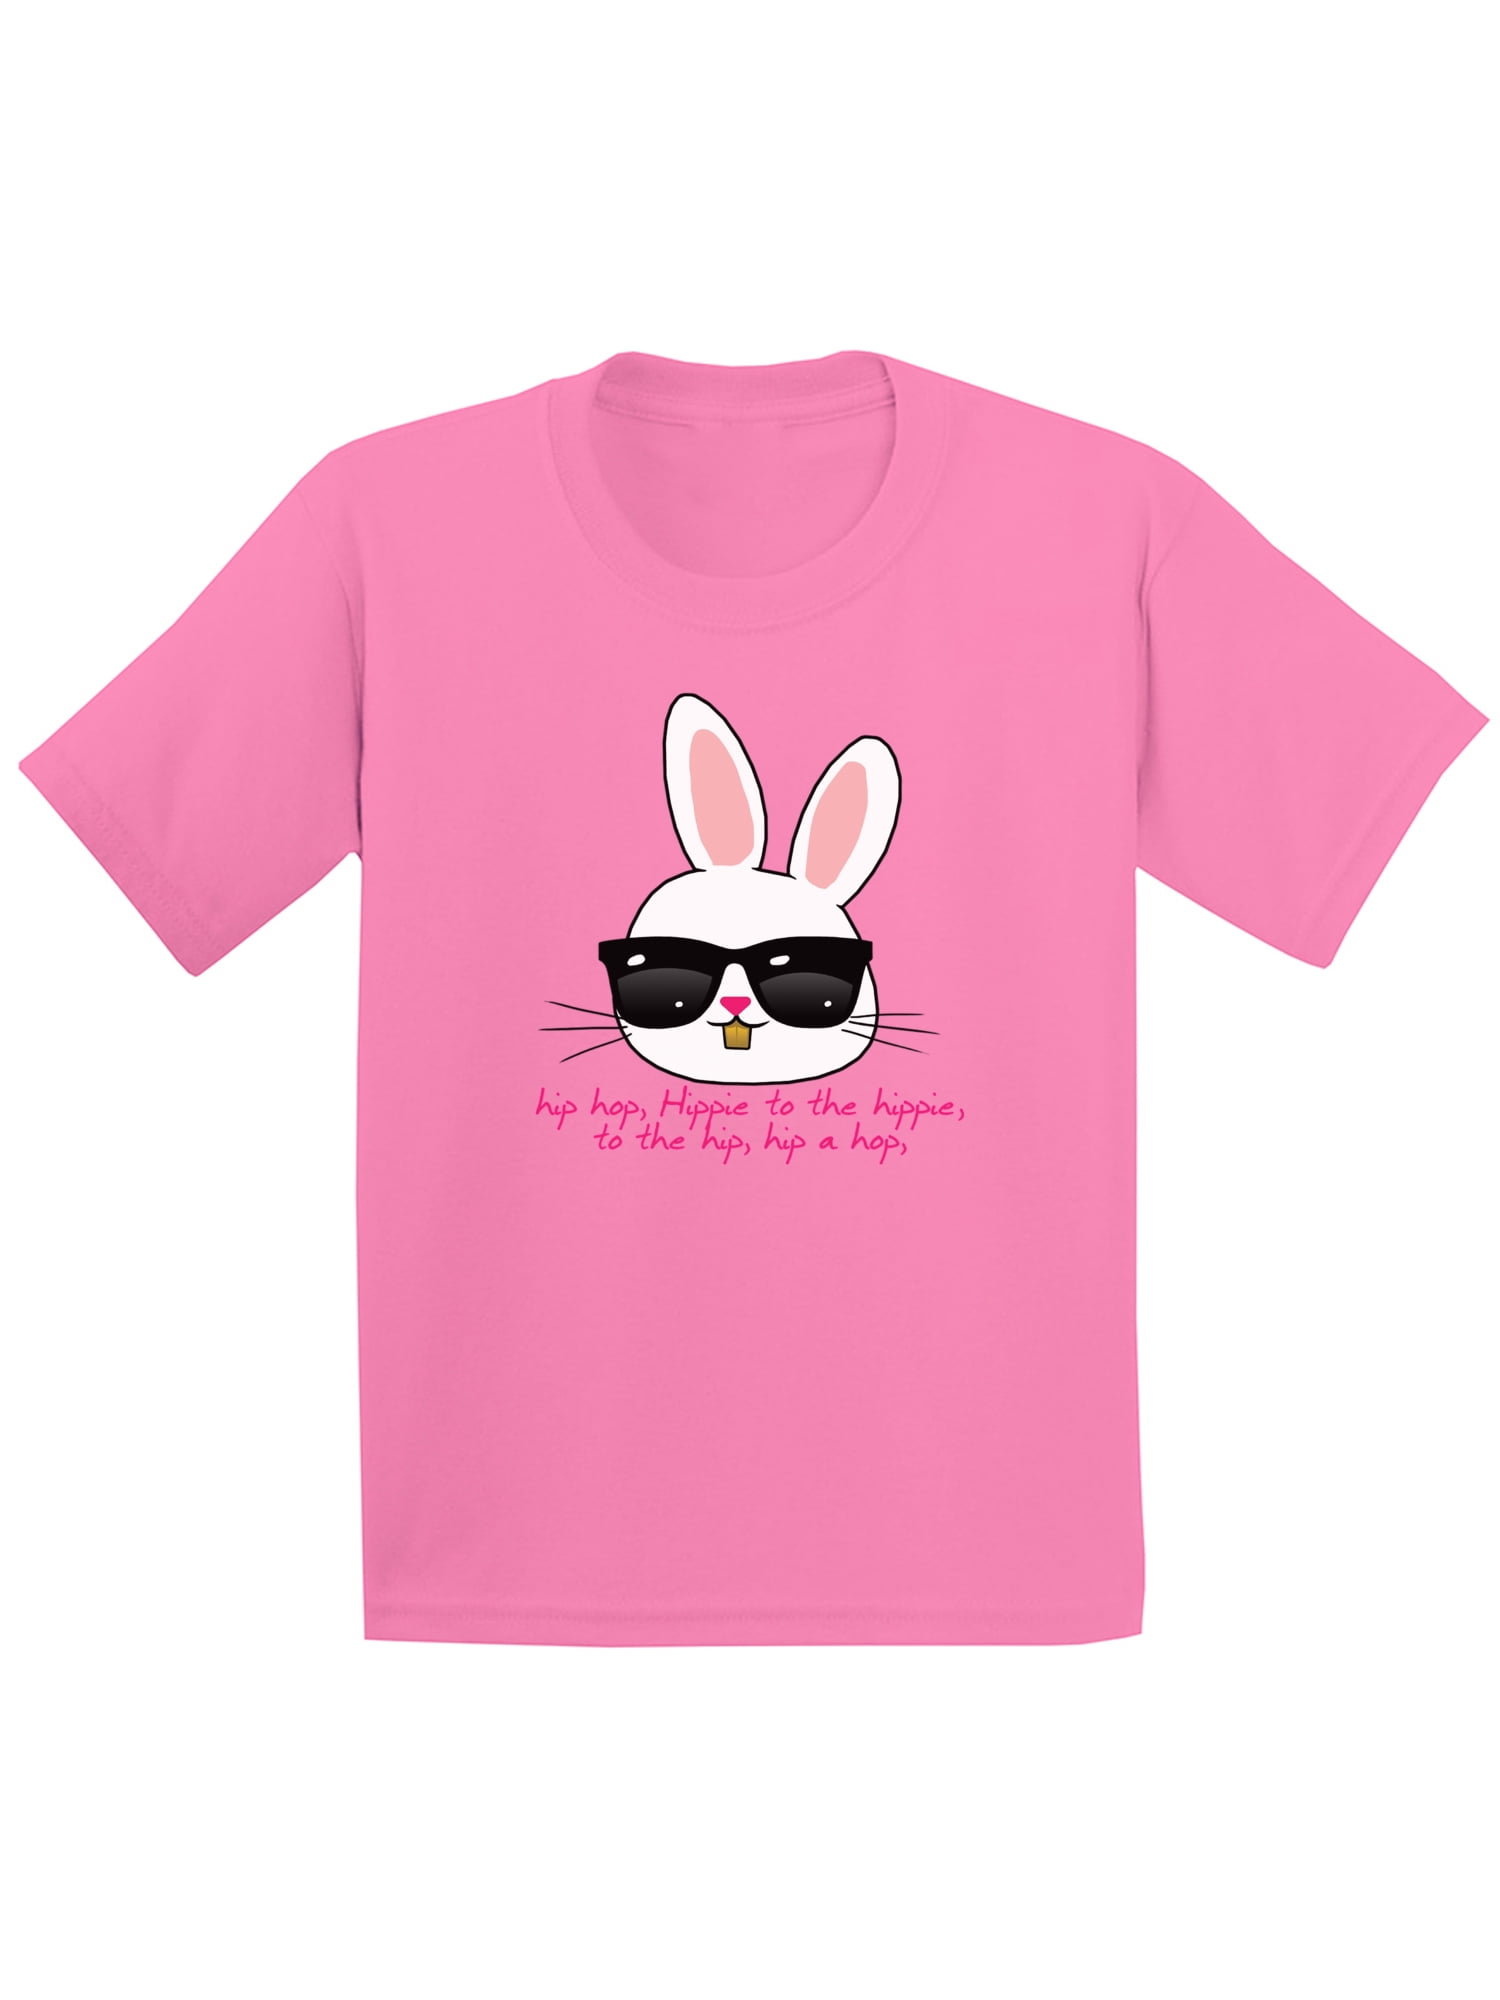 Easter Shirt for Kids Easter Bunny Graphic Tee Bunny With Leopard Ears Tutu Made to Order Shirt Easter Shirt Girls Easter Bunny Shirt